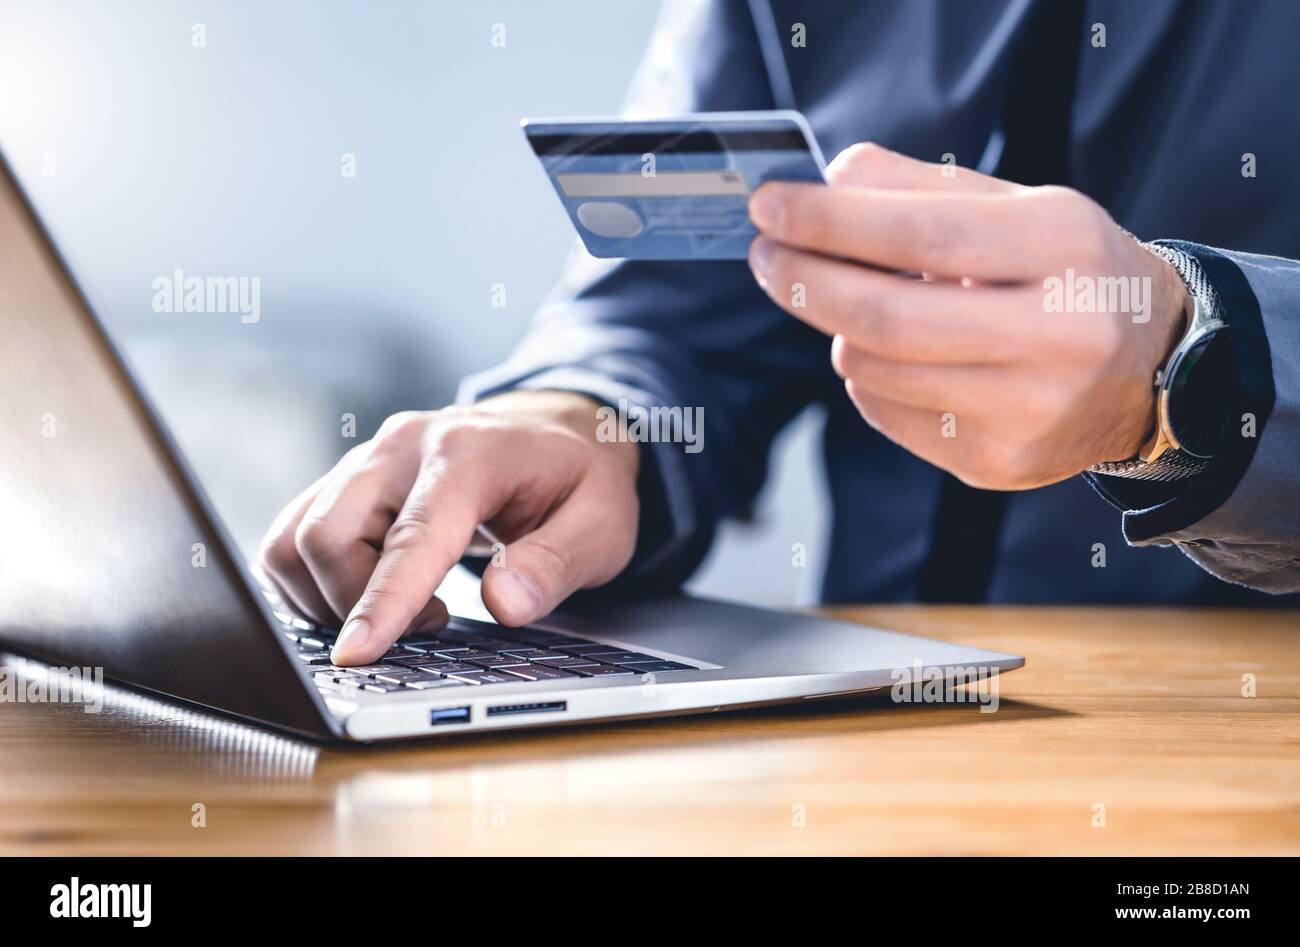 Safe online payment and electronic money transfer security. Pay with digital technology. Man using credit card and laptop to login to internet bank. Stock Photo